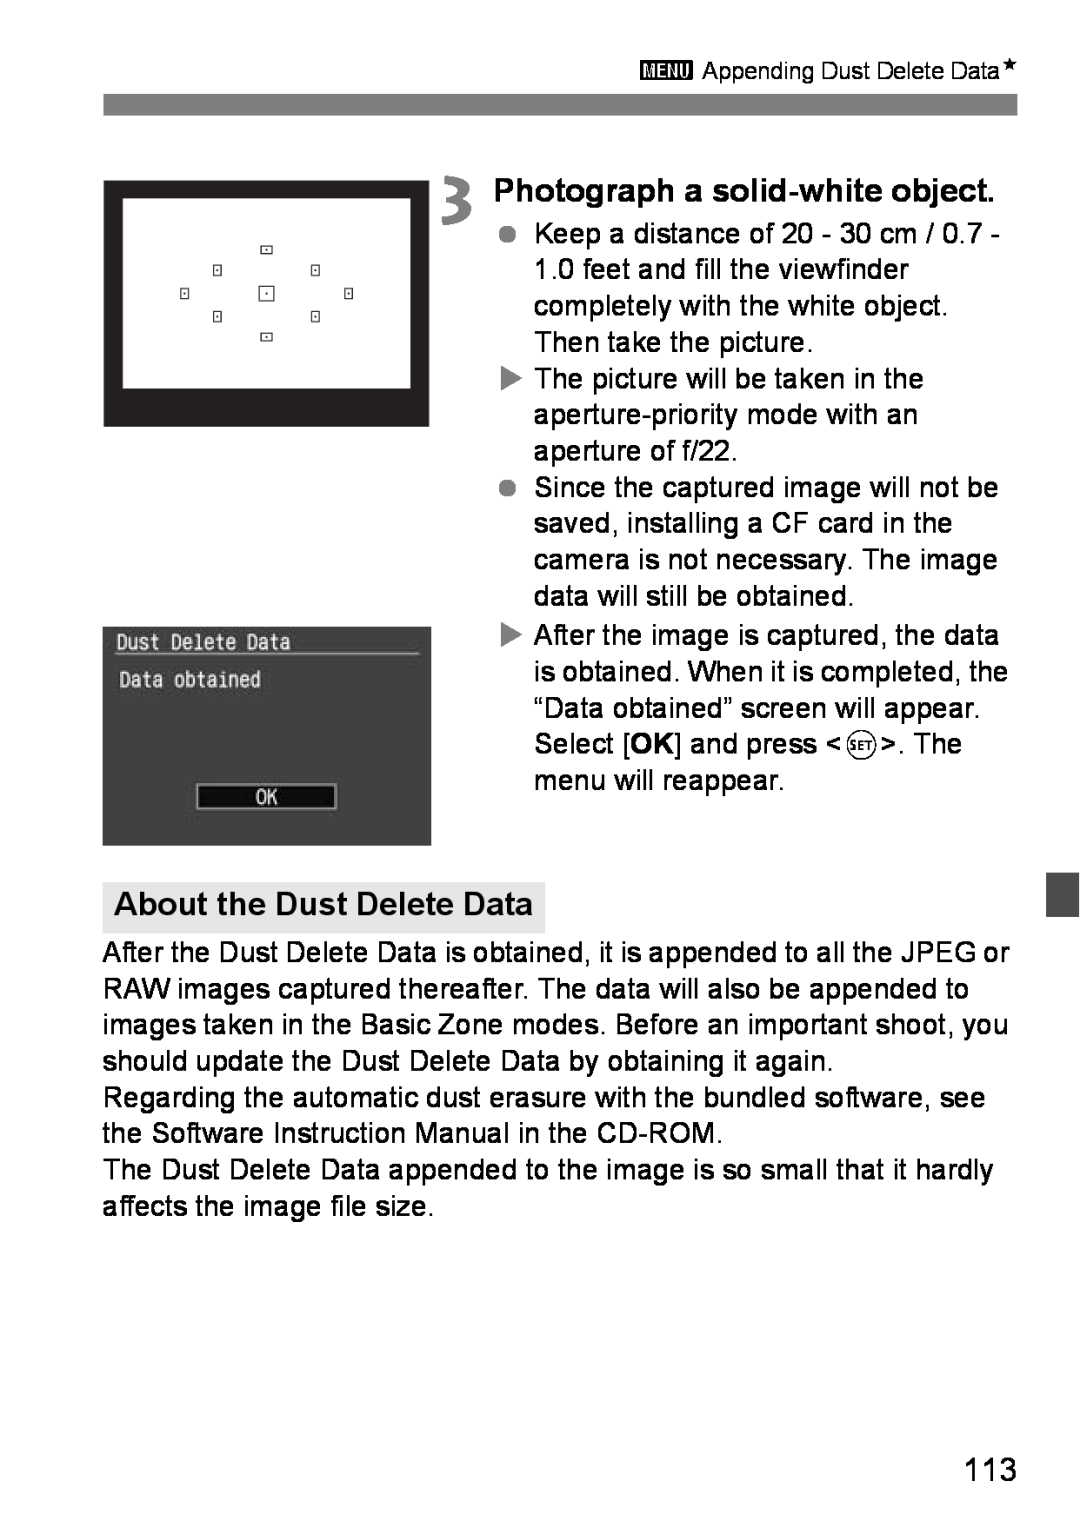 Canon EOS DIGITAL REBEL XTI instruction manual Photograph a solid-white object, About the Dust Delete Data 